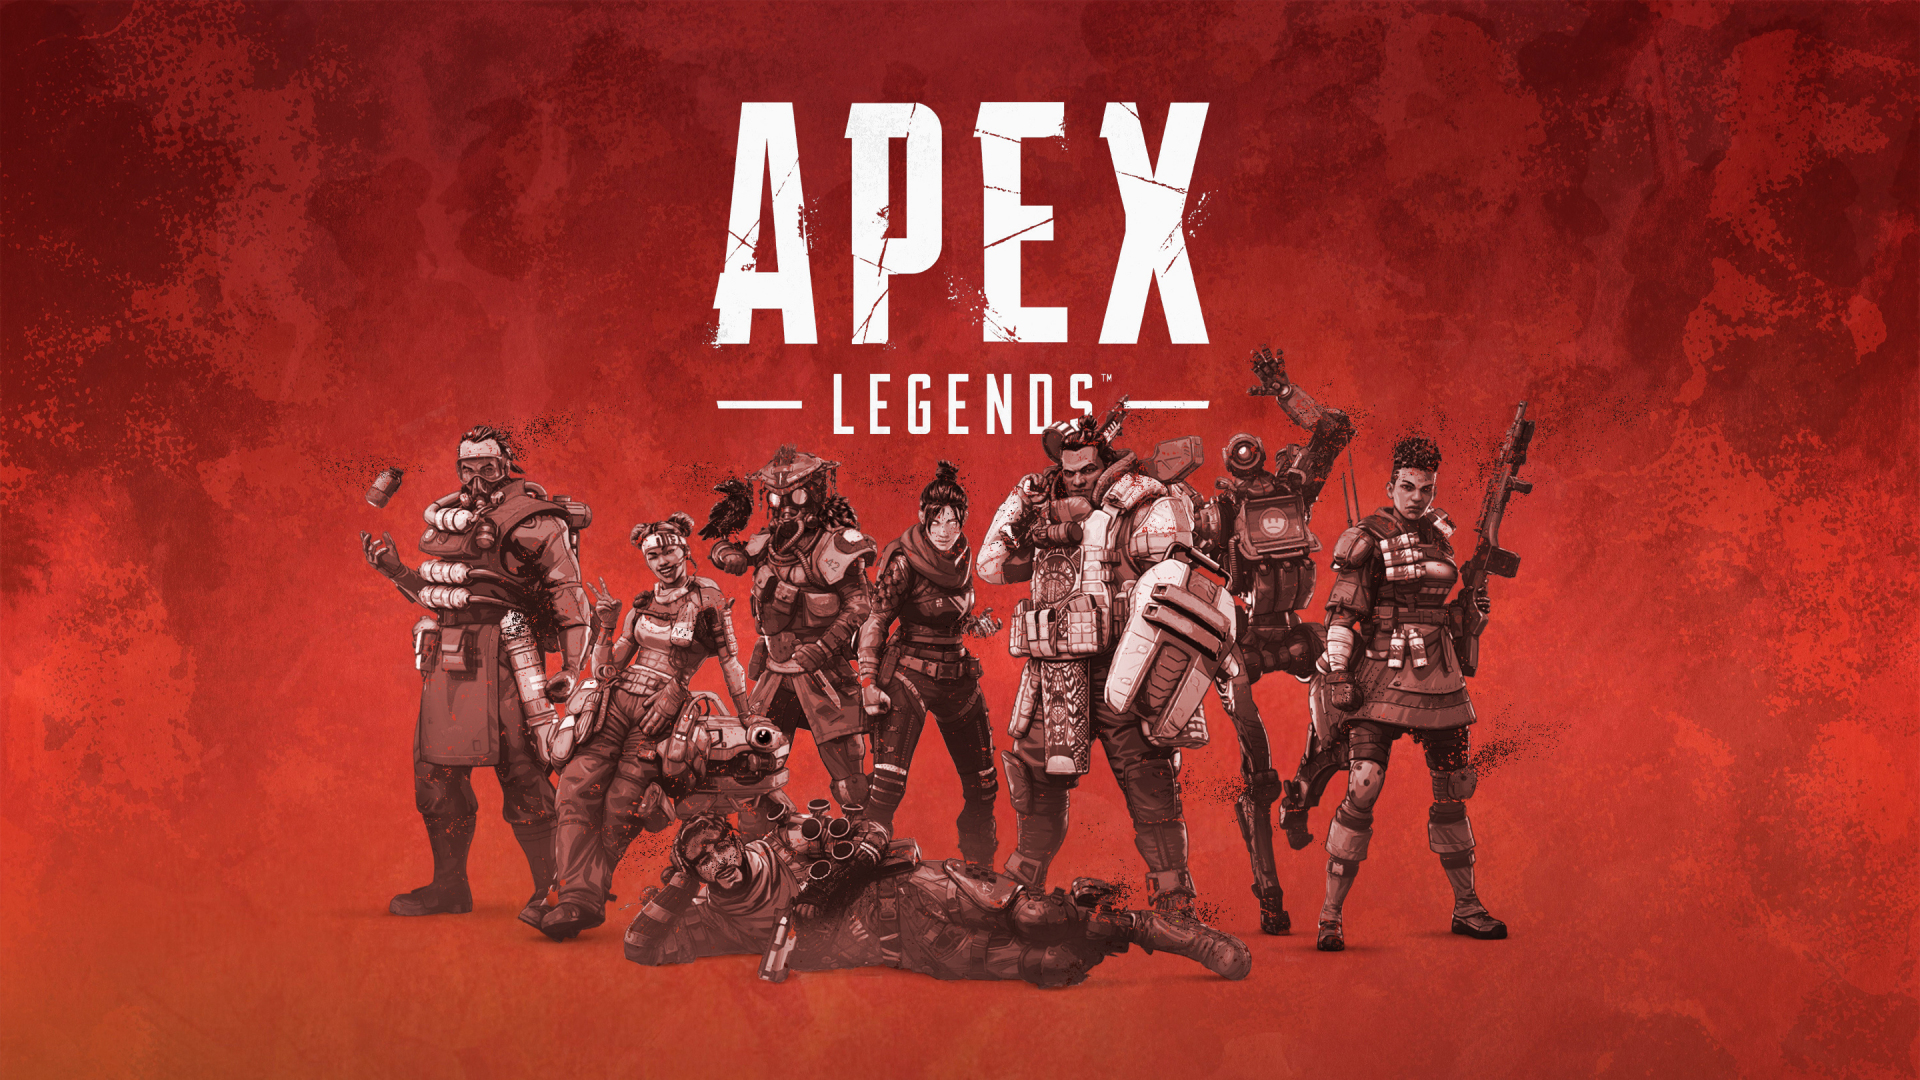 Download 1920x1080 wallpaper poster, video game, 2019 apex legends, full hd,  hdtv, fhd, 1080p, 1920x1080 hd image, background, 19804